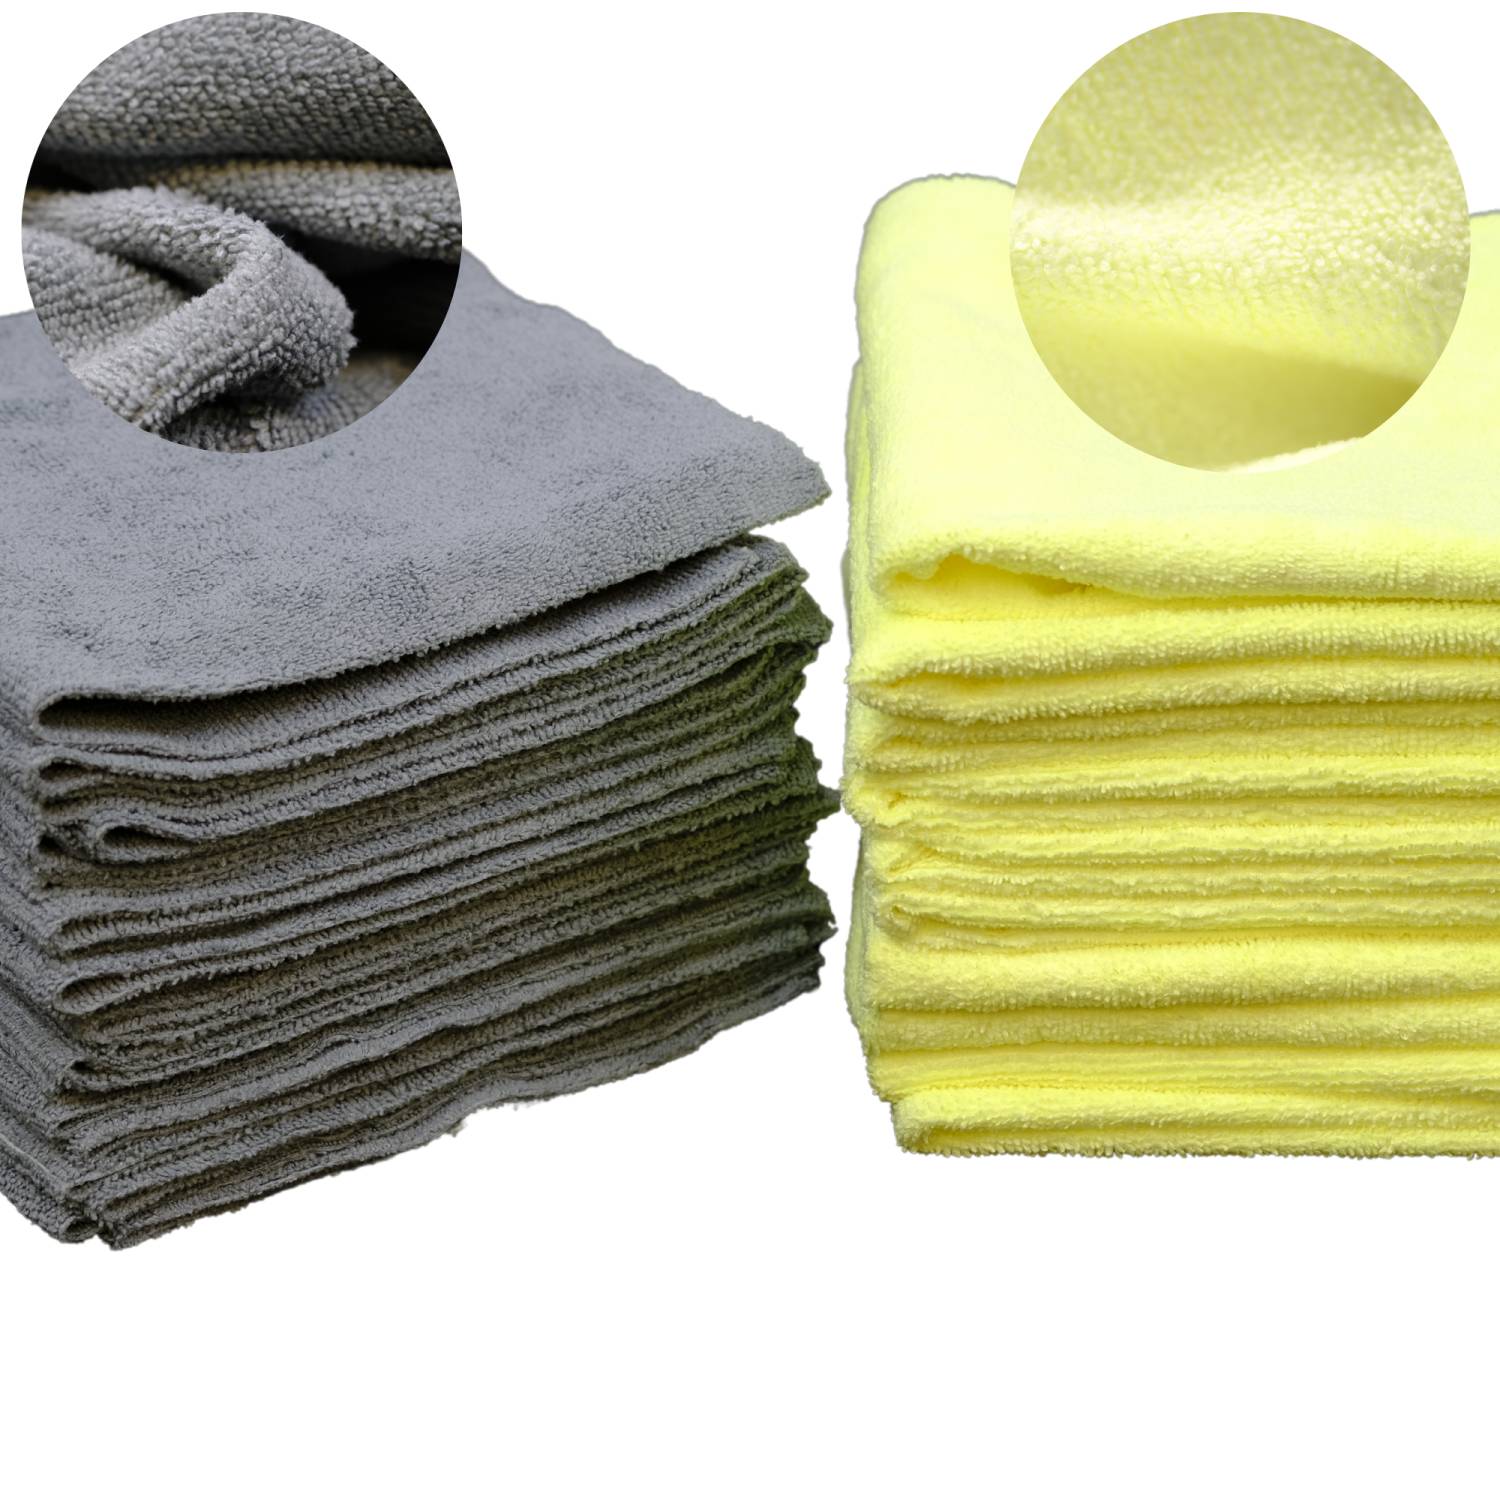 Pack of 36 - Microfibre Seamless terry cloths in Grey & Yellow